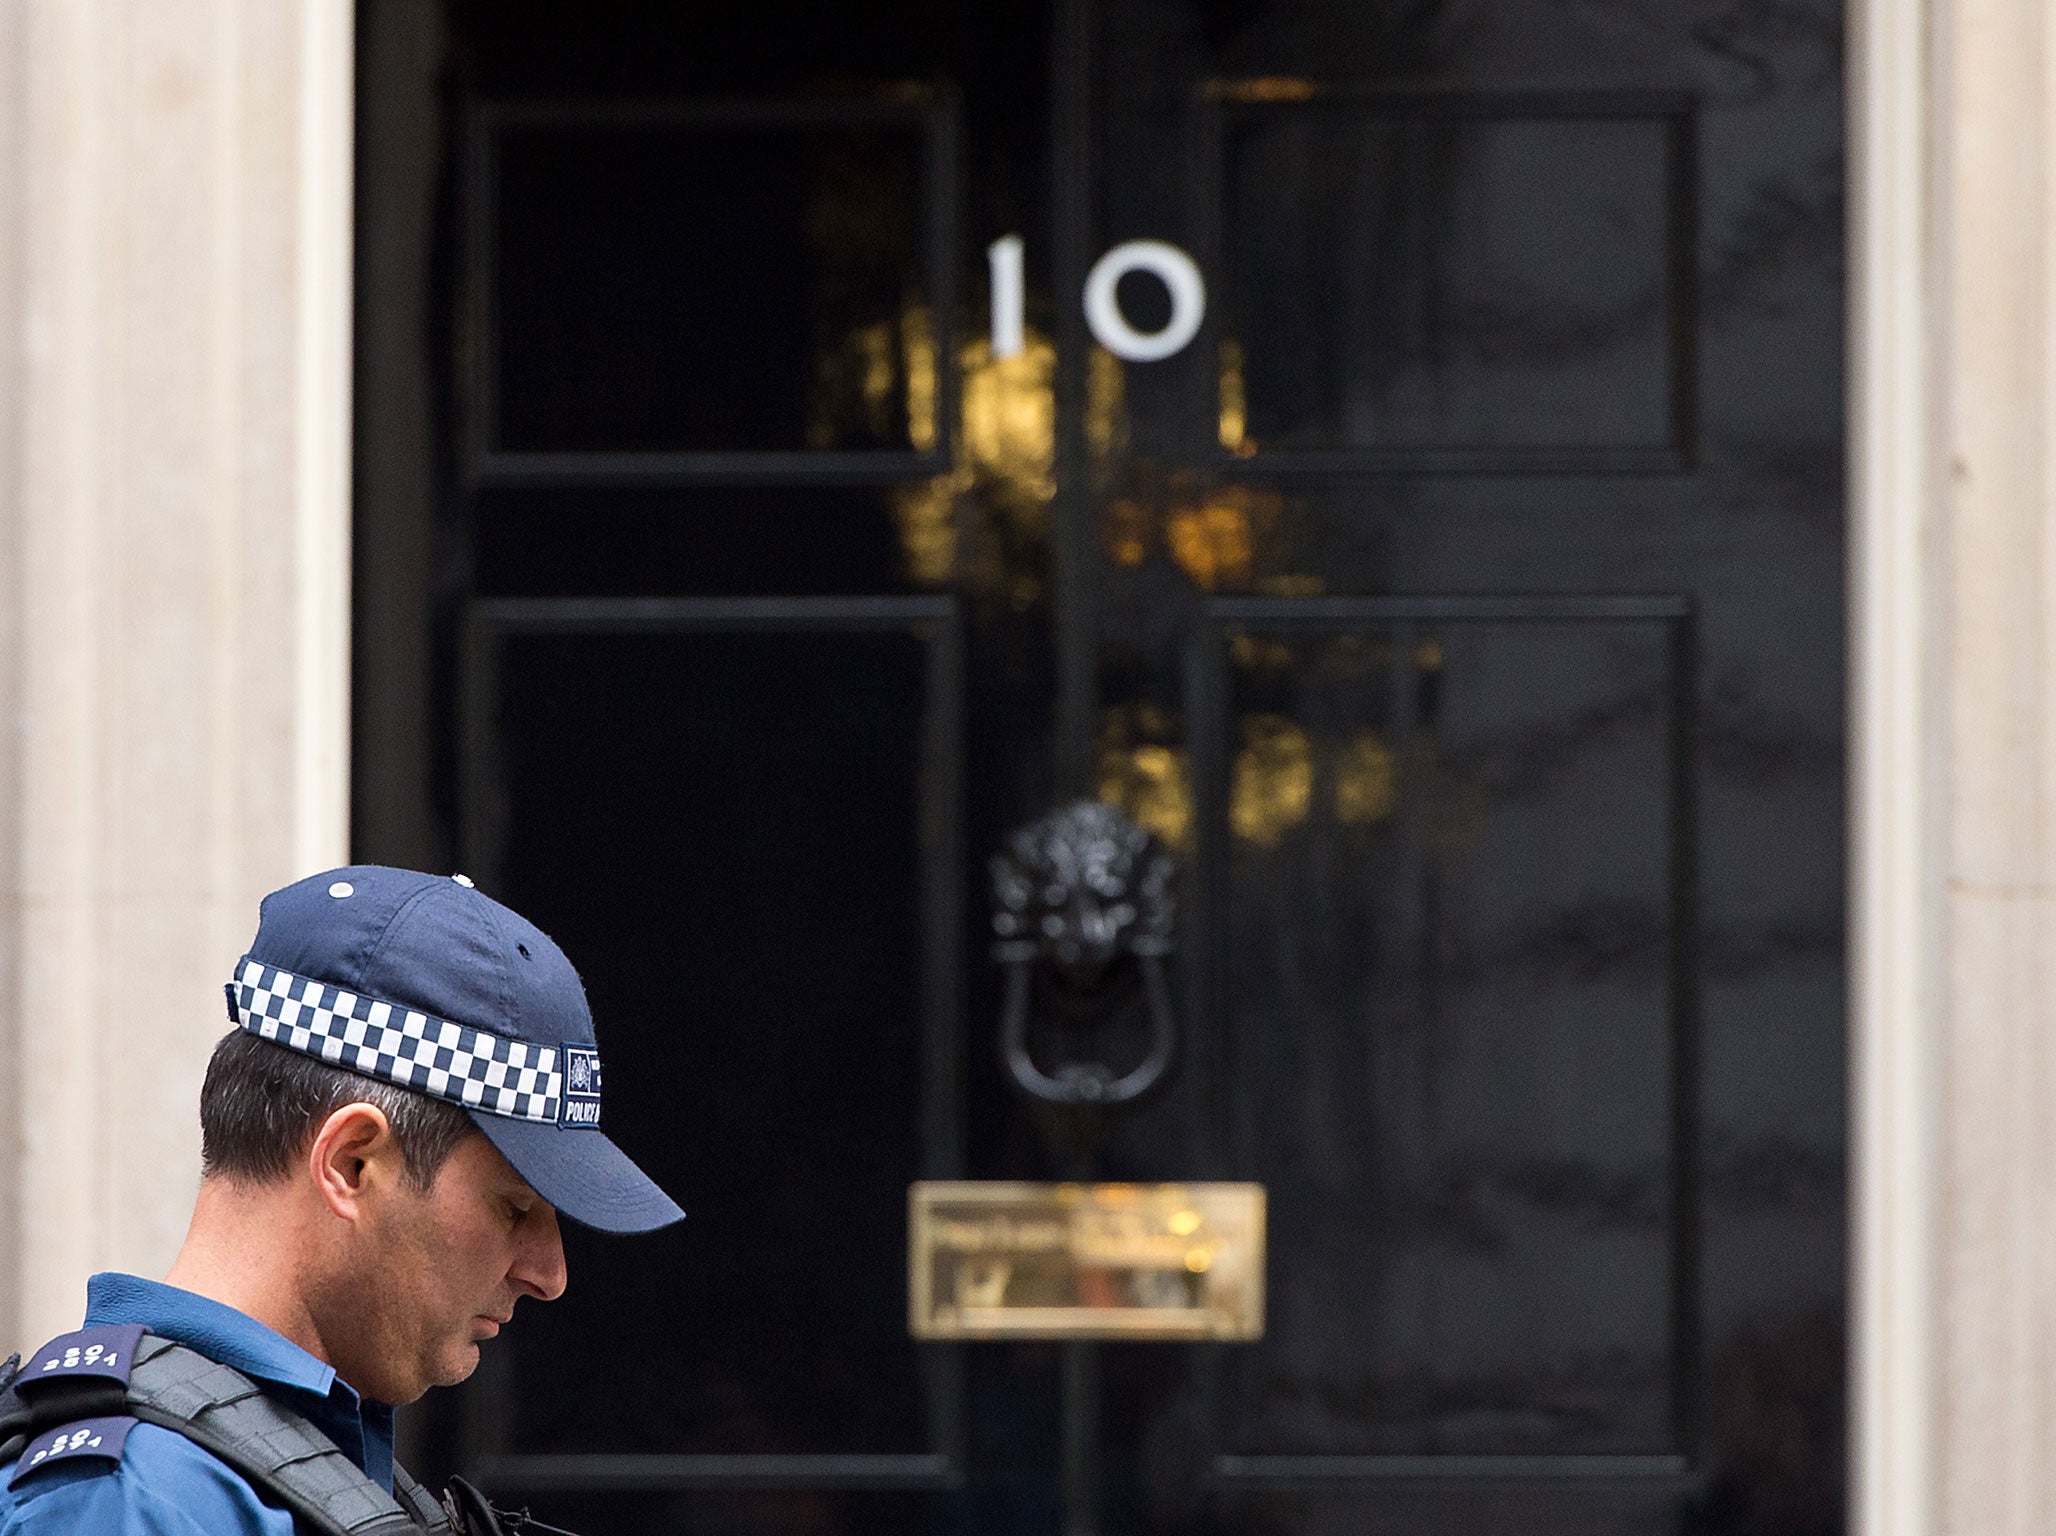 A policeman stands outside Number 10 Downing Street on November 16, 2015 in London, England. Security in London has tightened after a series of terror attacks across the French capital of Paris